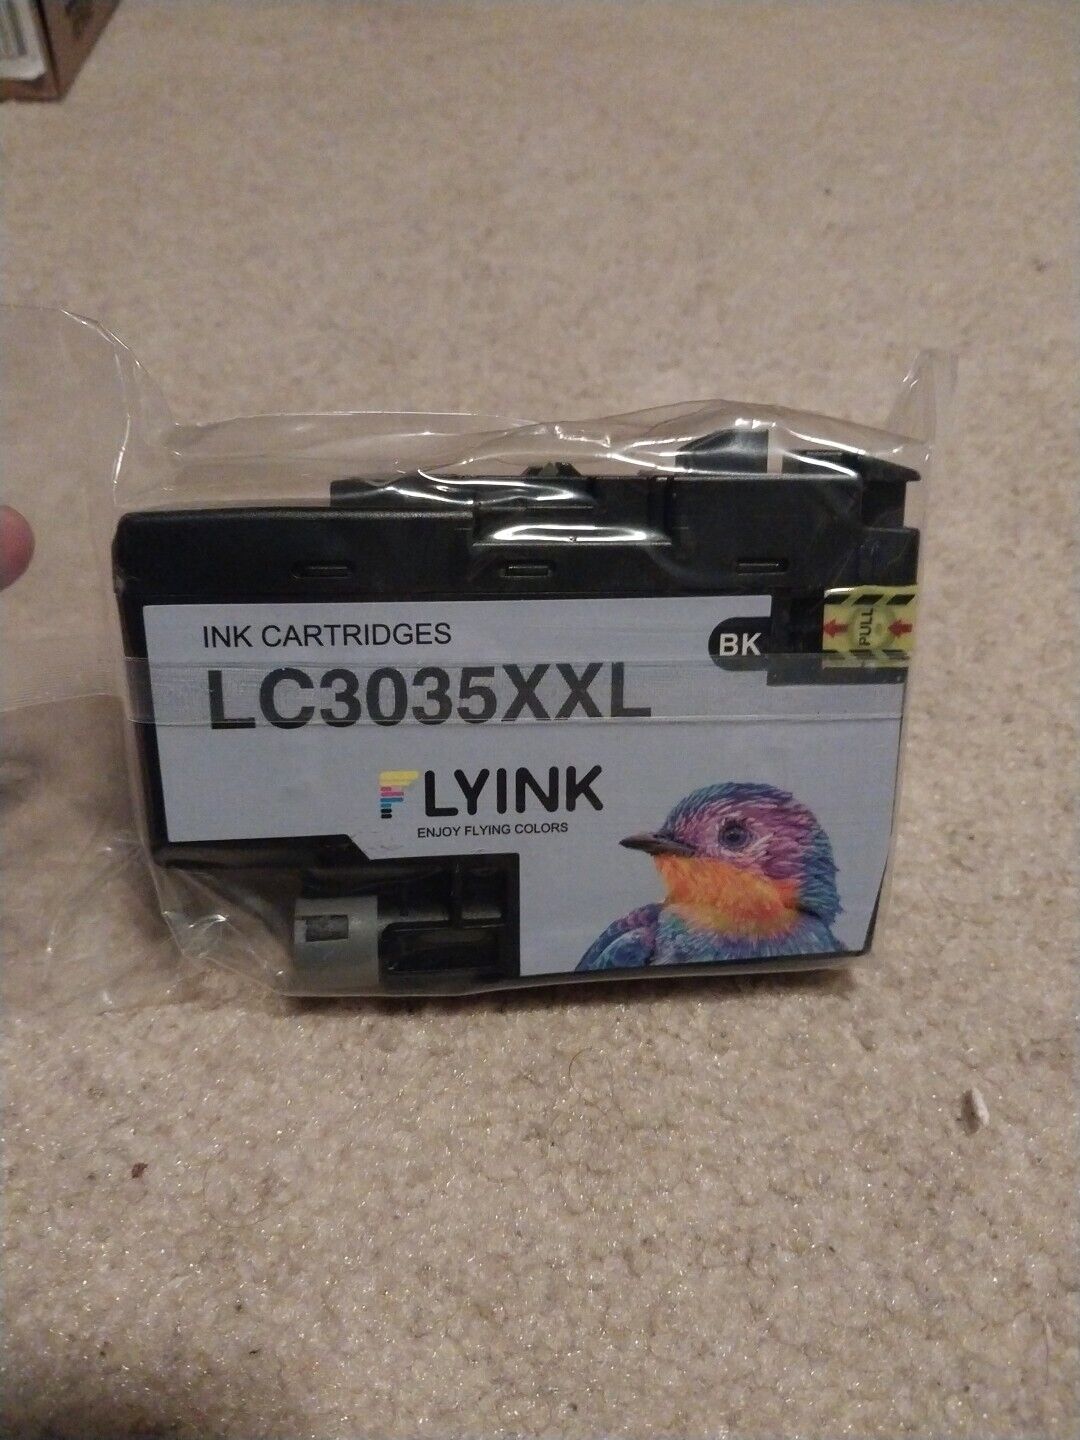 FLYINK LC3035XXL Ink Cartridge Replacement for Brother Printers 